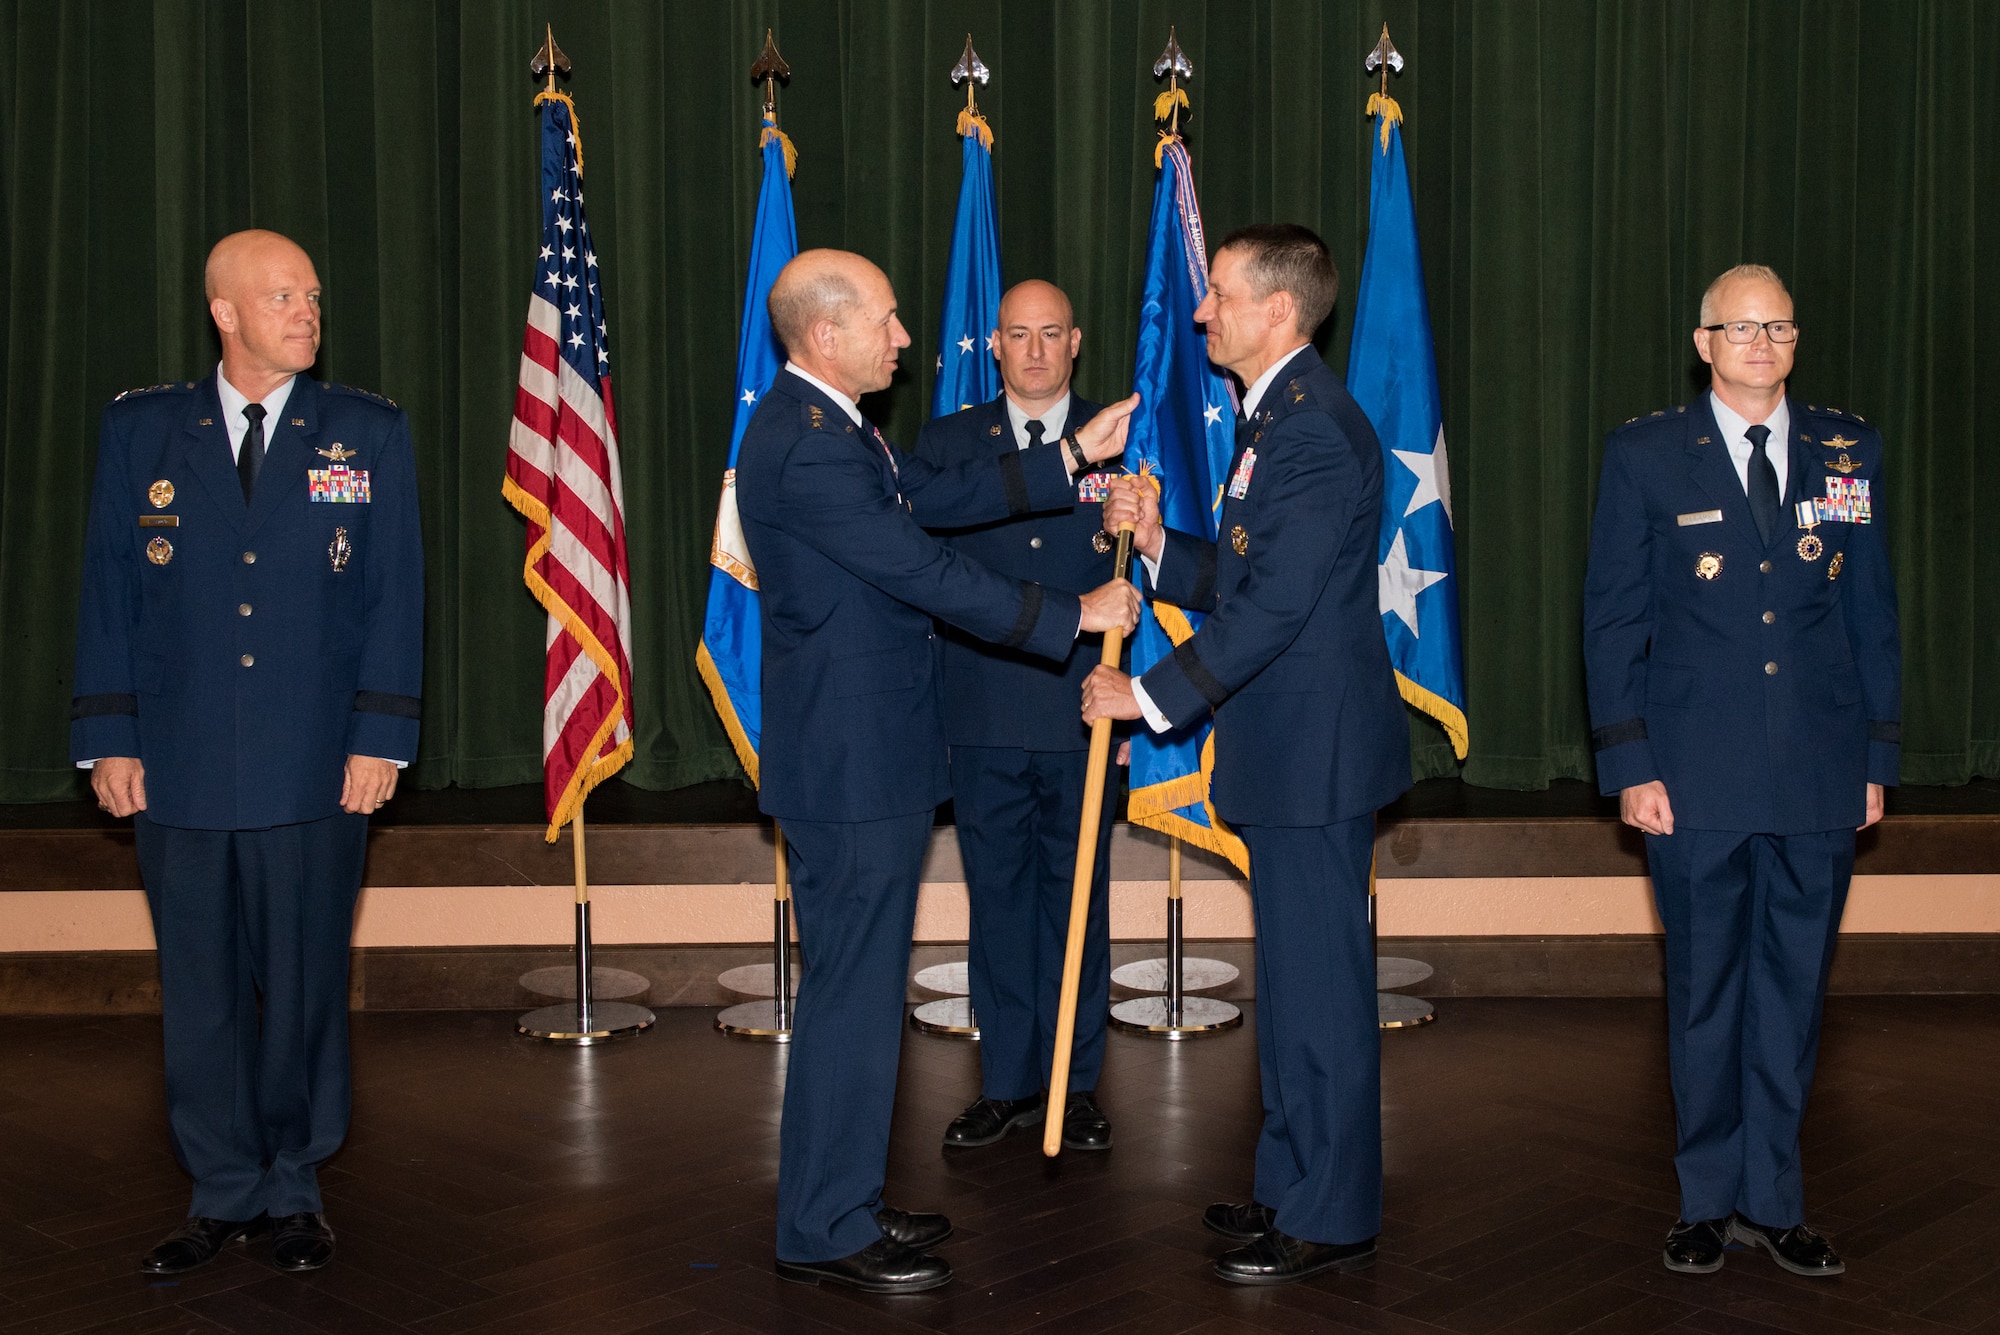 Gen. Mike Holmes, commander of Air Combat Command, presents the 24th Air Force guidon to Maj. Gen. Robert Skinner upon assuming command of the 24th AF during a ceremony at Joint Base San Antonio-Lackland, Texas, July 17, 2018. Twenty Fourth Air Force was reassigned to a new major command and welcomed Skinner during the ceremony. (U.S. Air Force photo by Andrew C. Patterson)